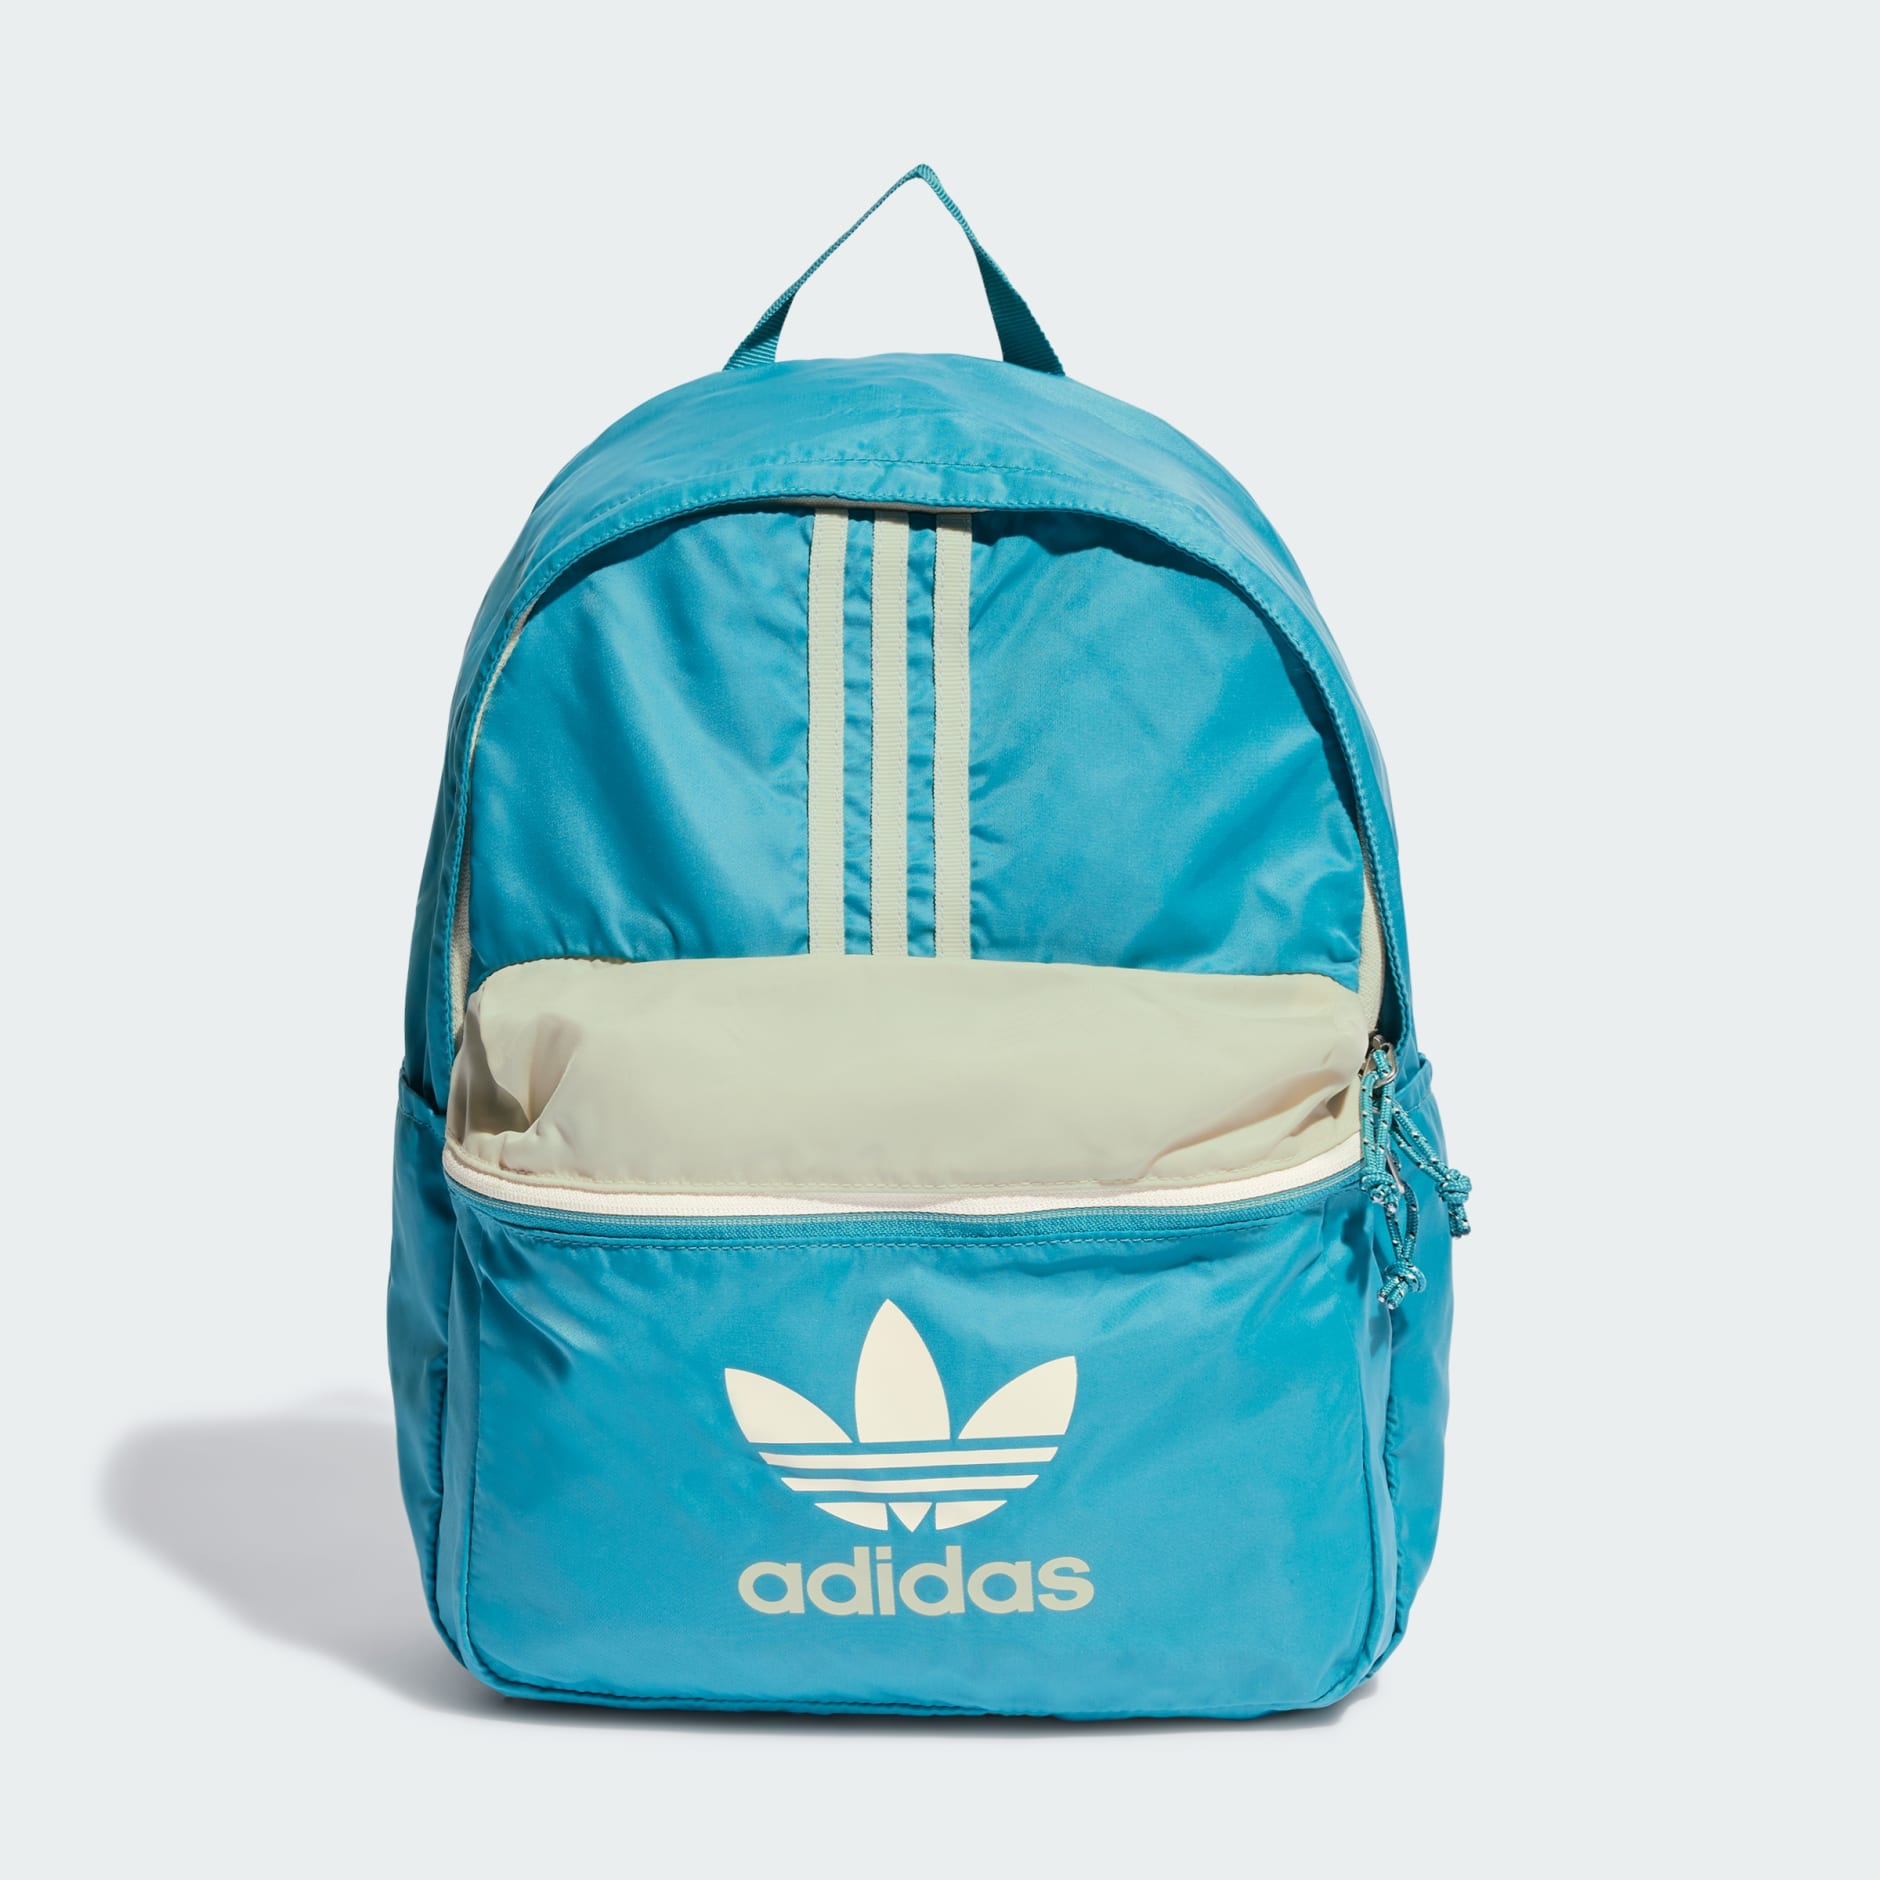 Accessories - Adicolor Archive Backpack - Turquoise | adidas South Africa